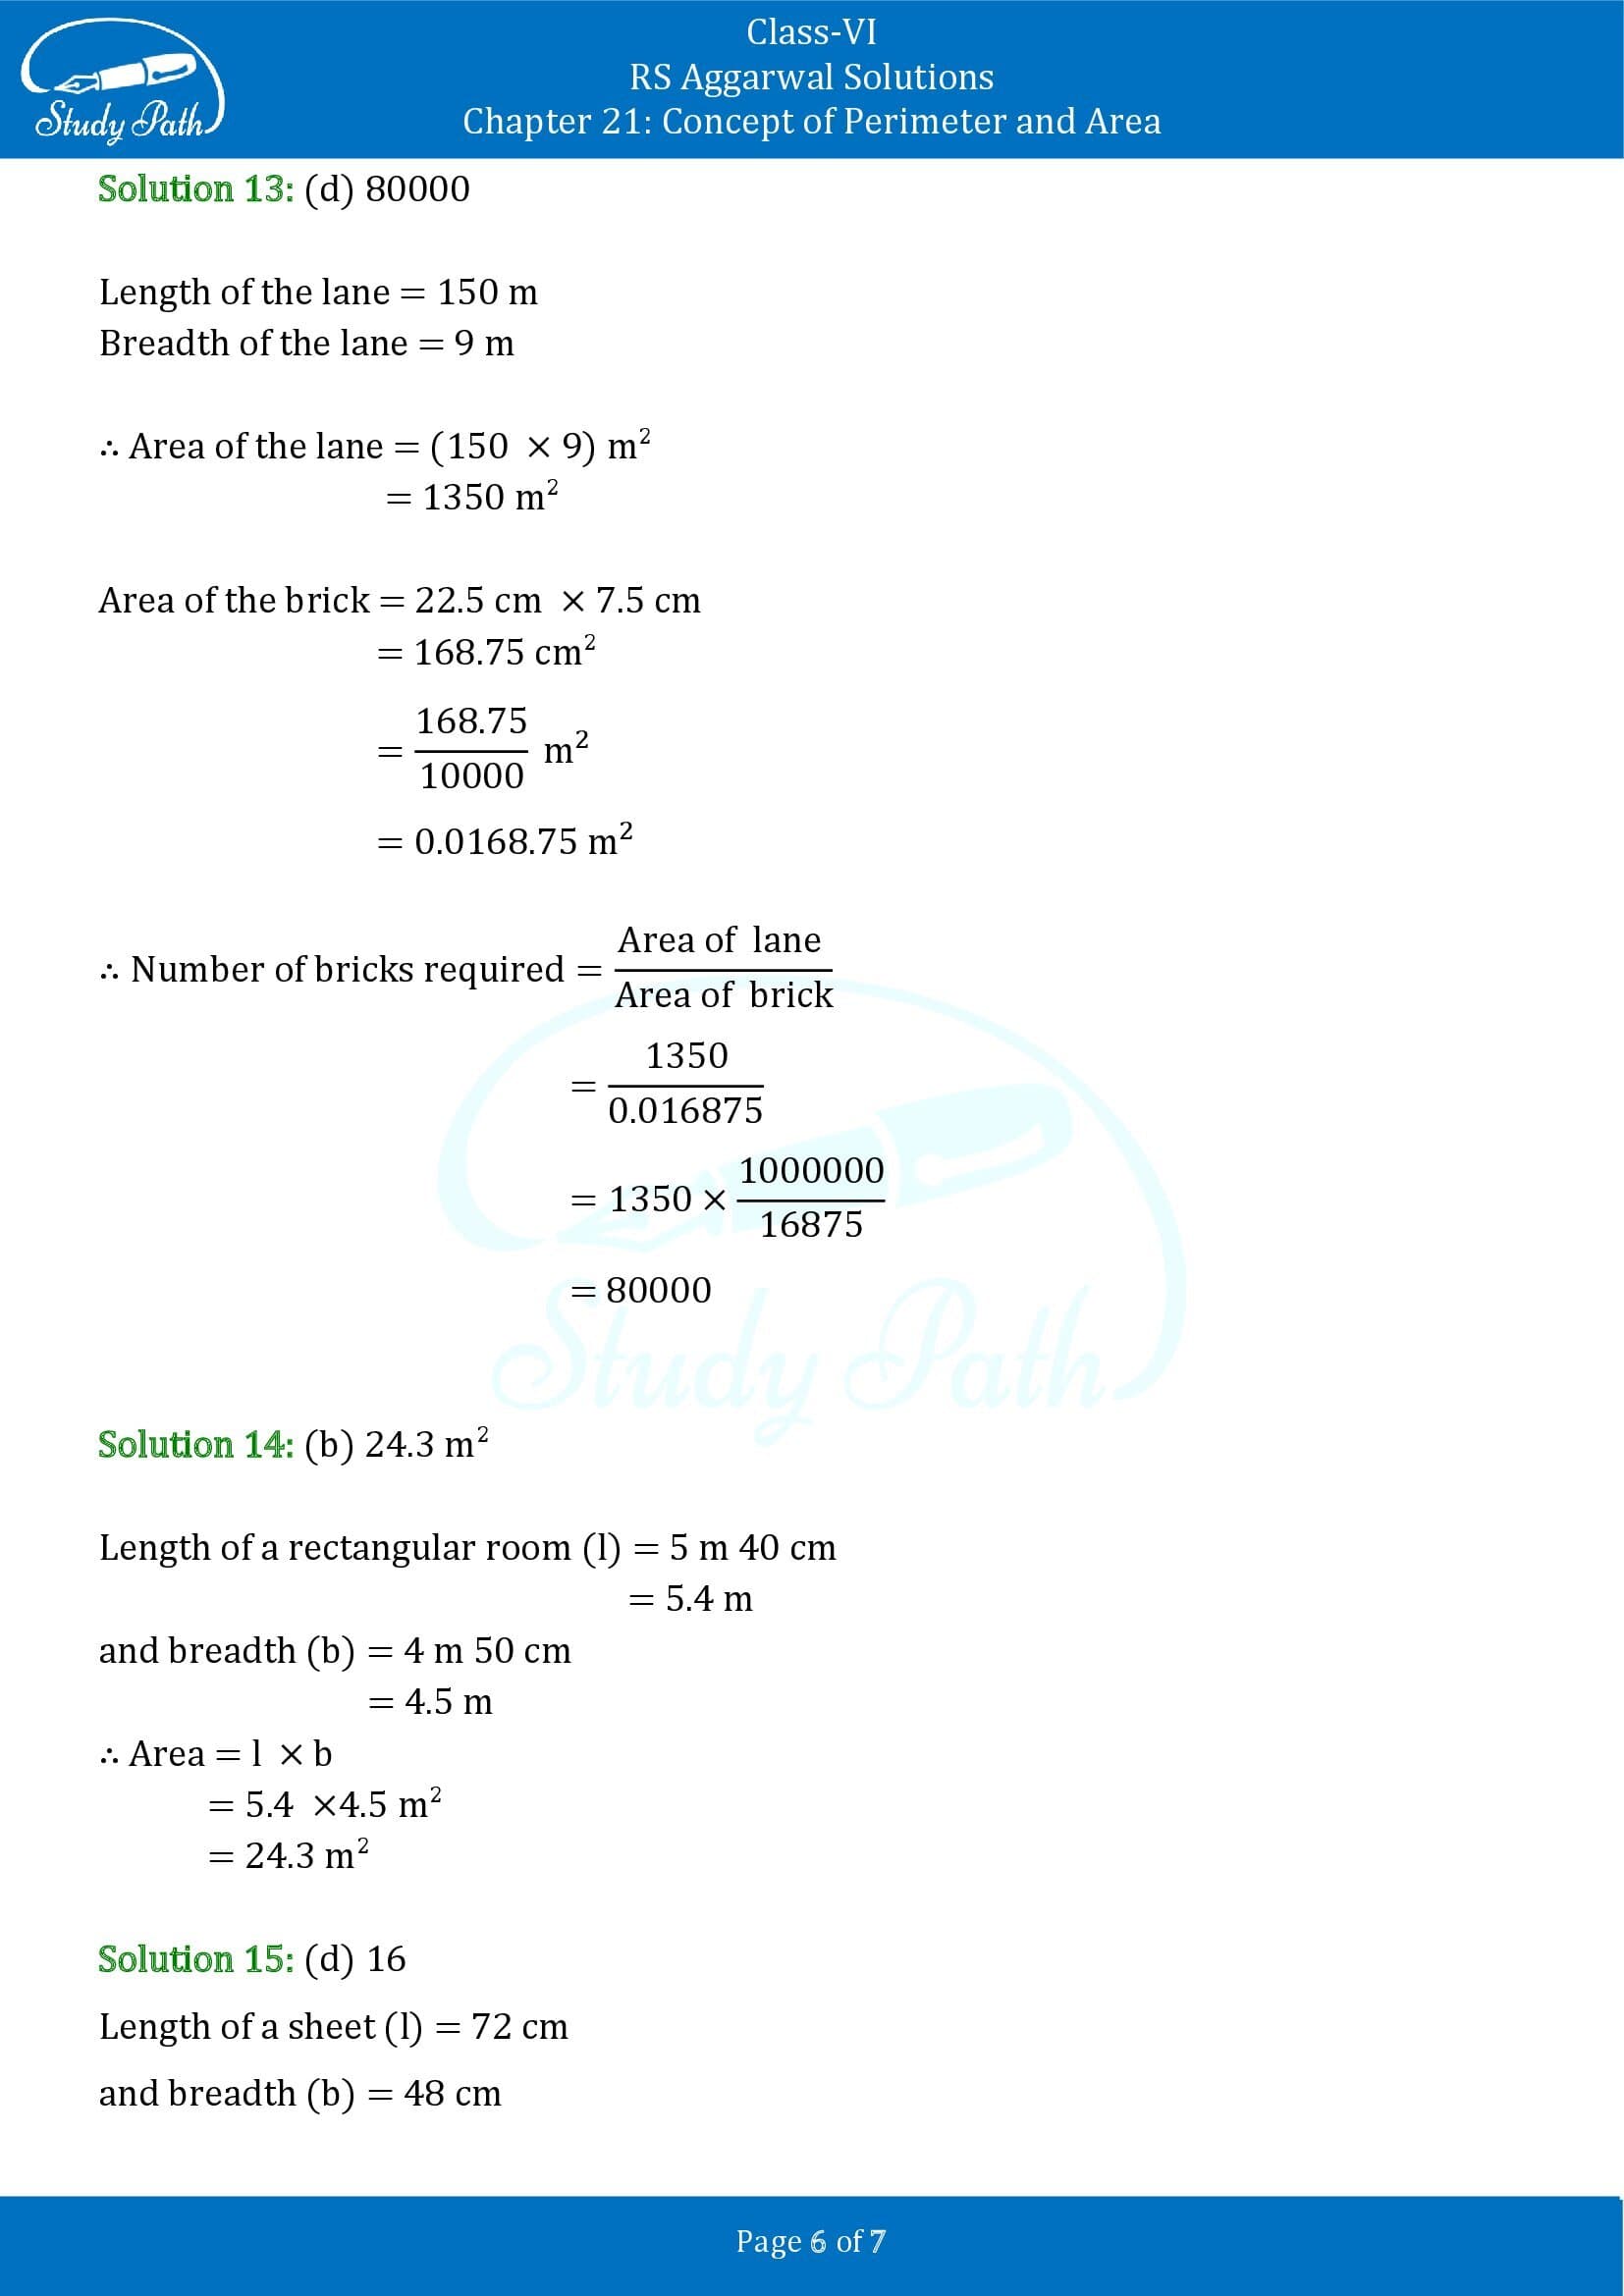 RS Aggarwal Solutions Class 6 Chapter 21 Concept of Perimeter and Area Exercise 21E MCQ 006